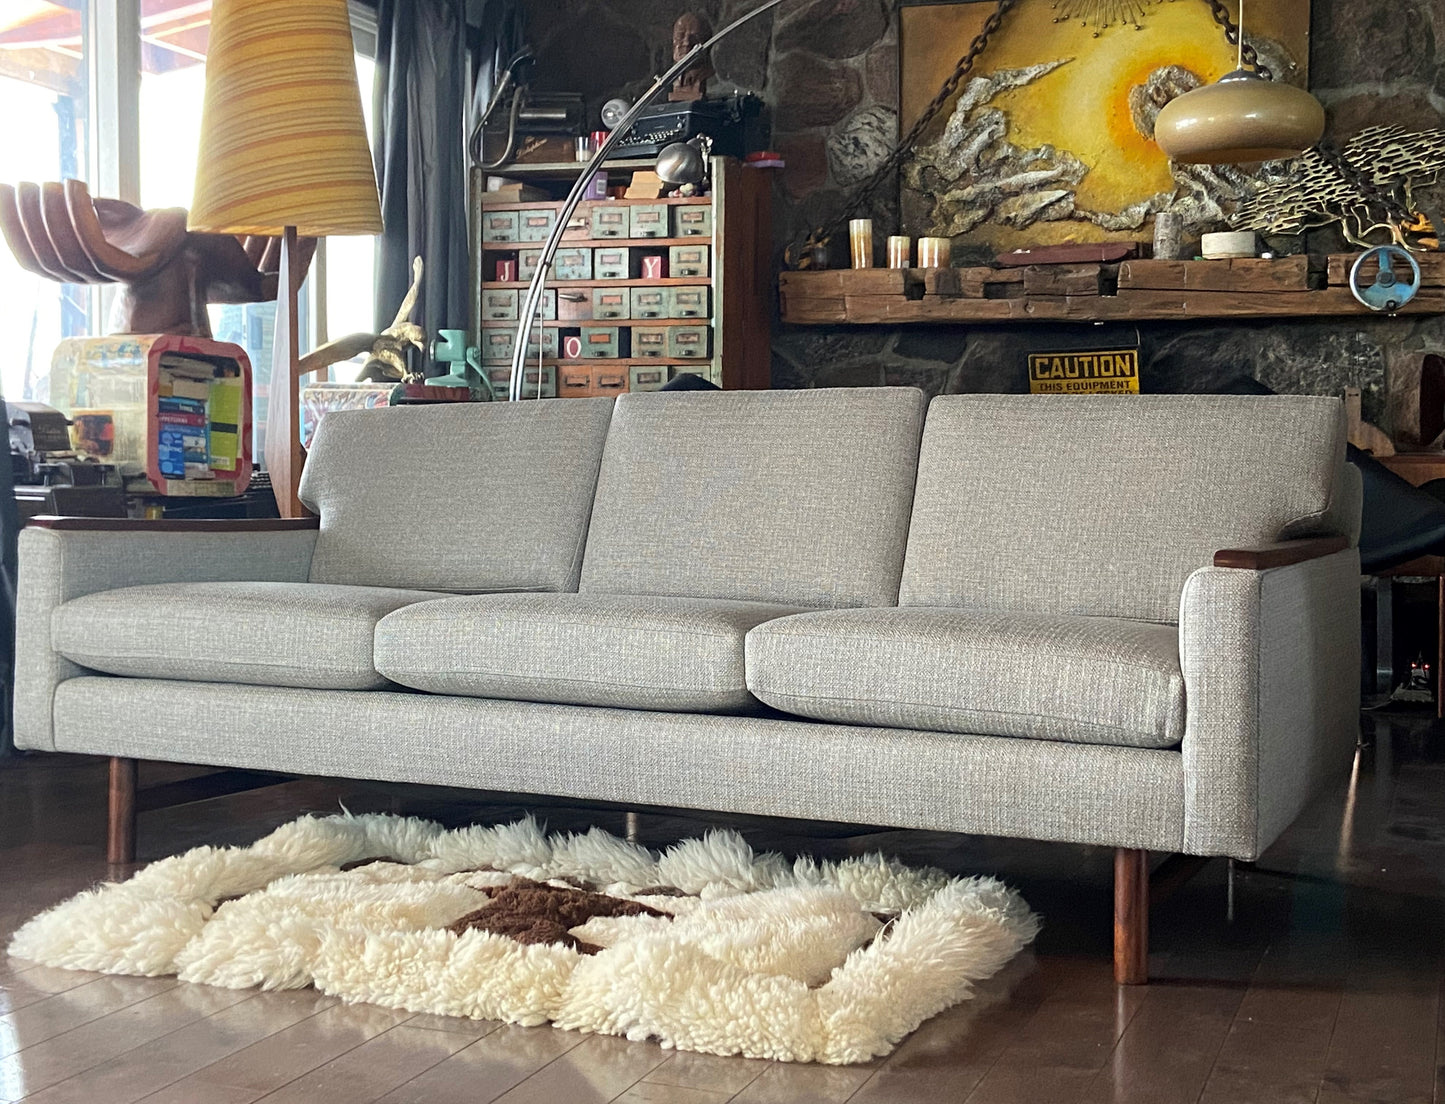 REFINISHED REUPHOLSTERED in Greige Performance Fabric High Quality MCM Sofa by SELIG - PERFECT